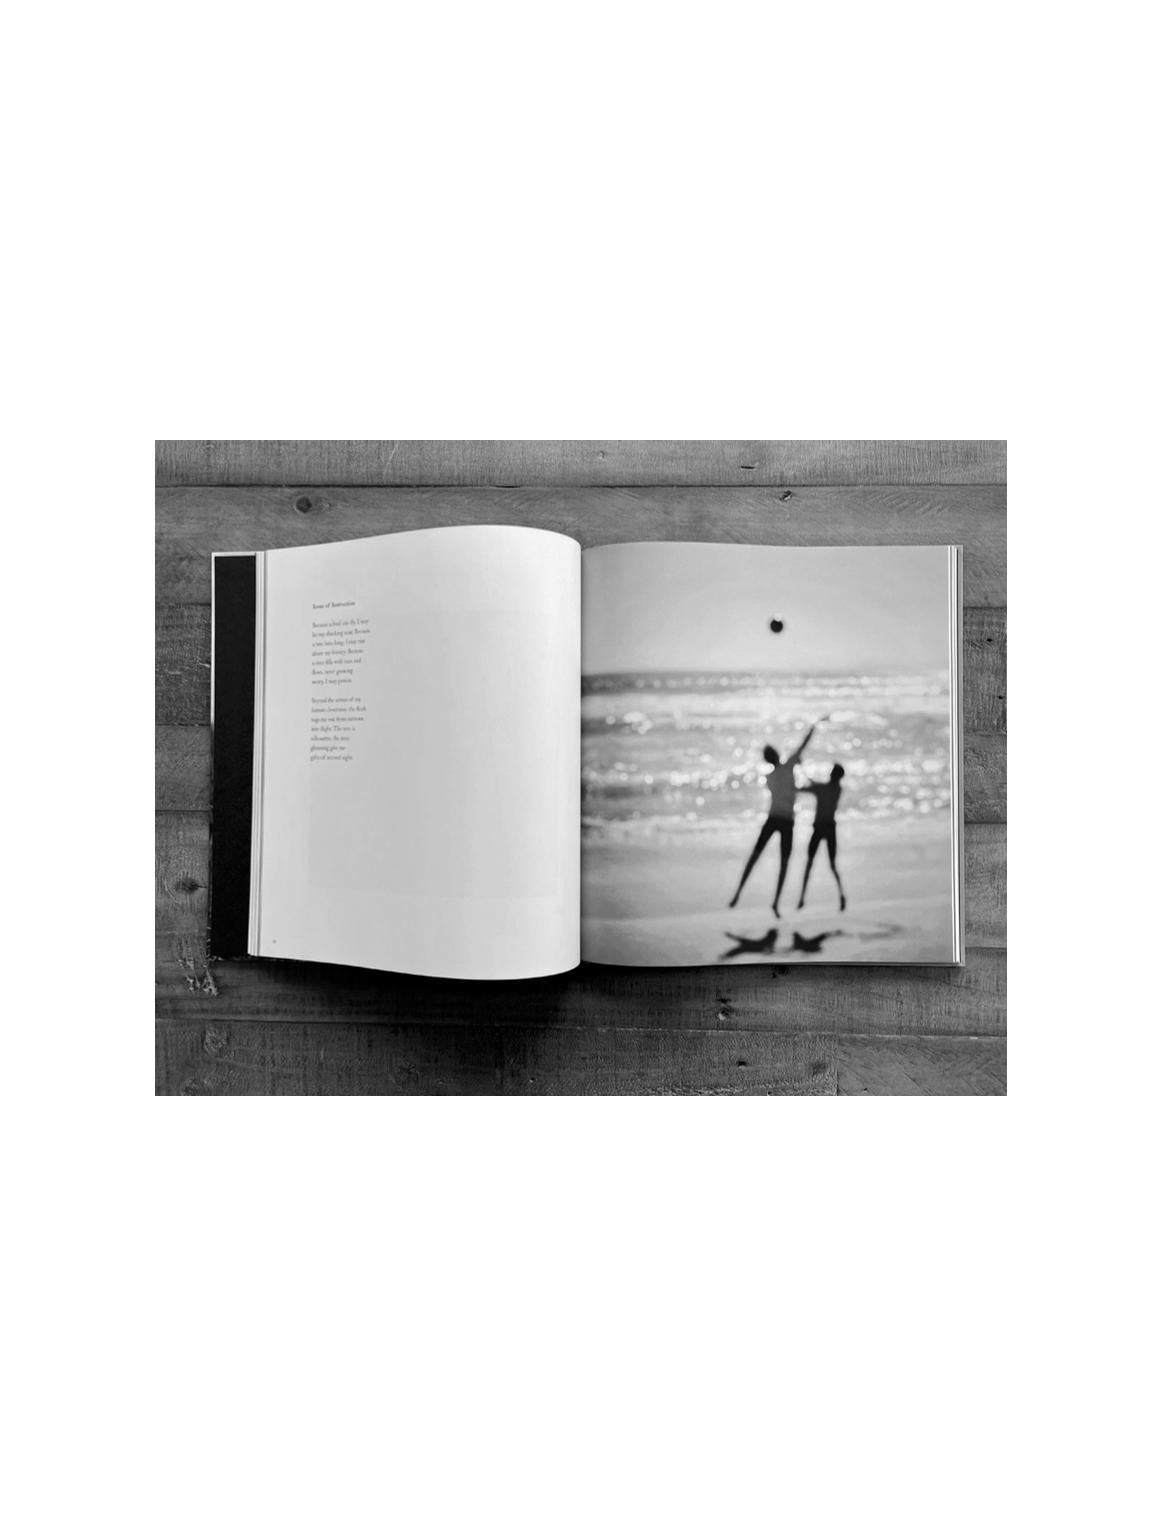 Book (Signed Edition) - Photography: "I Hope You Find What You're Looking For"